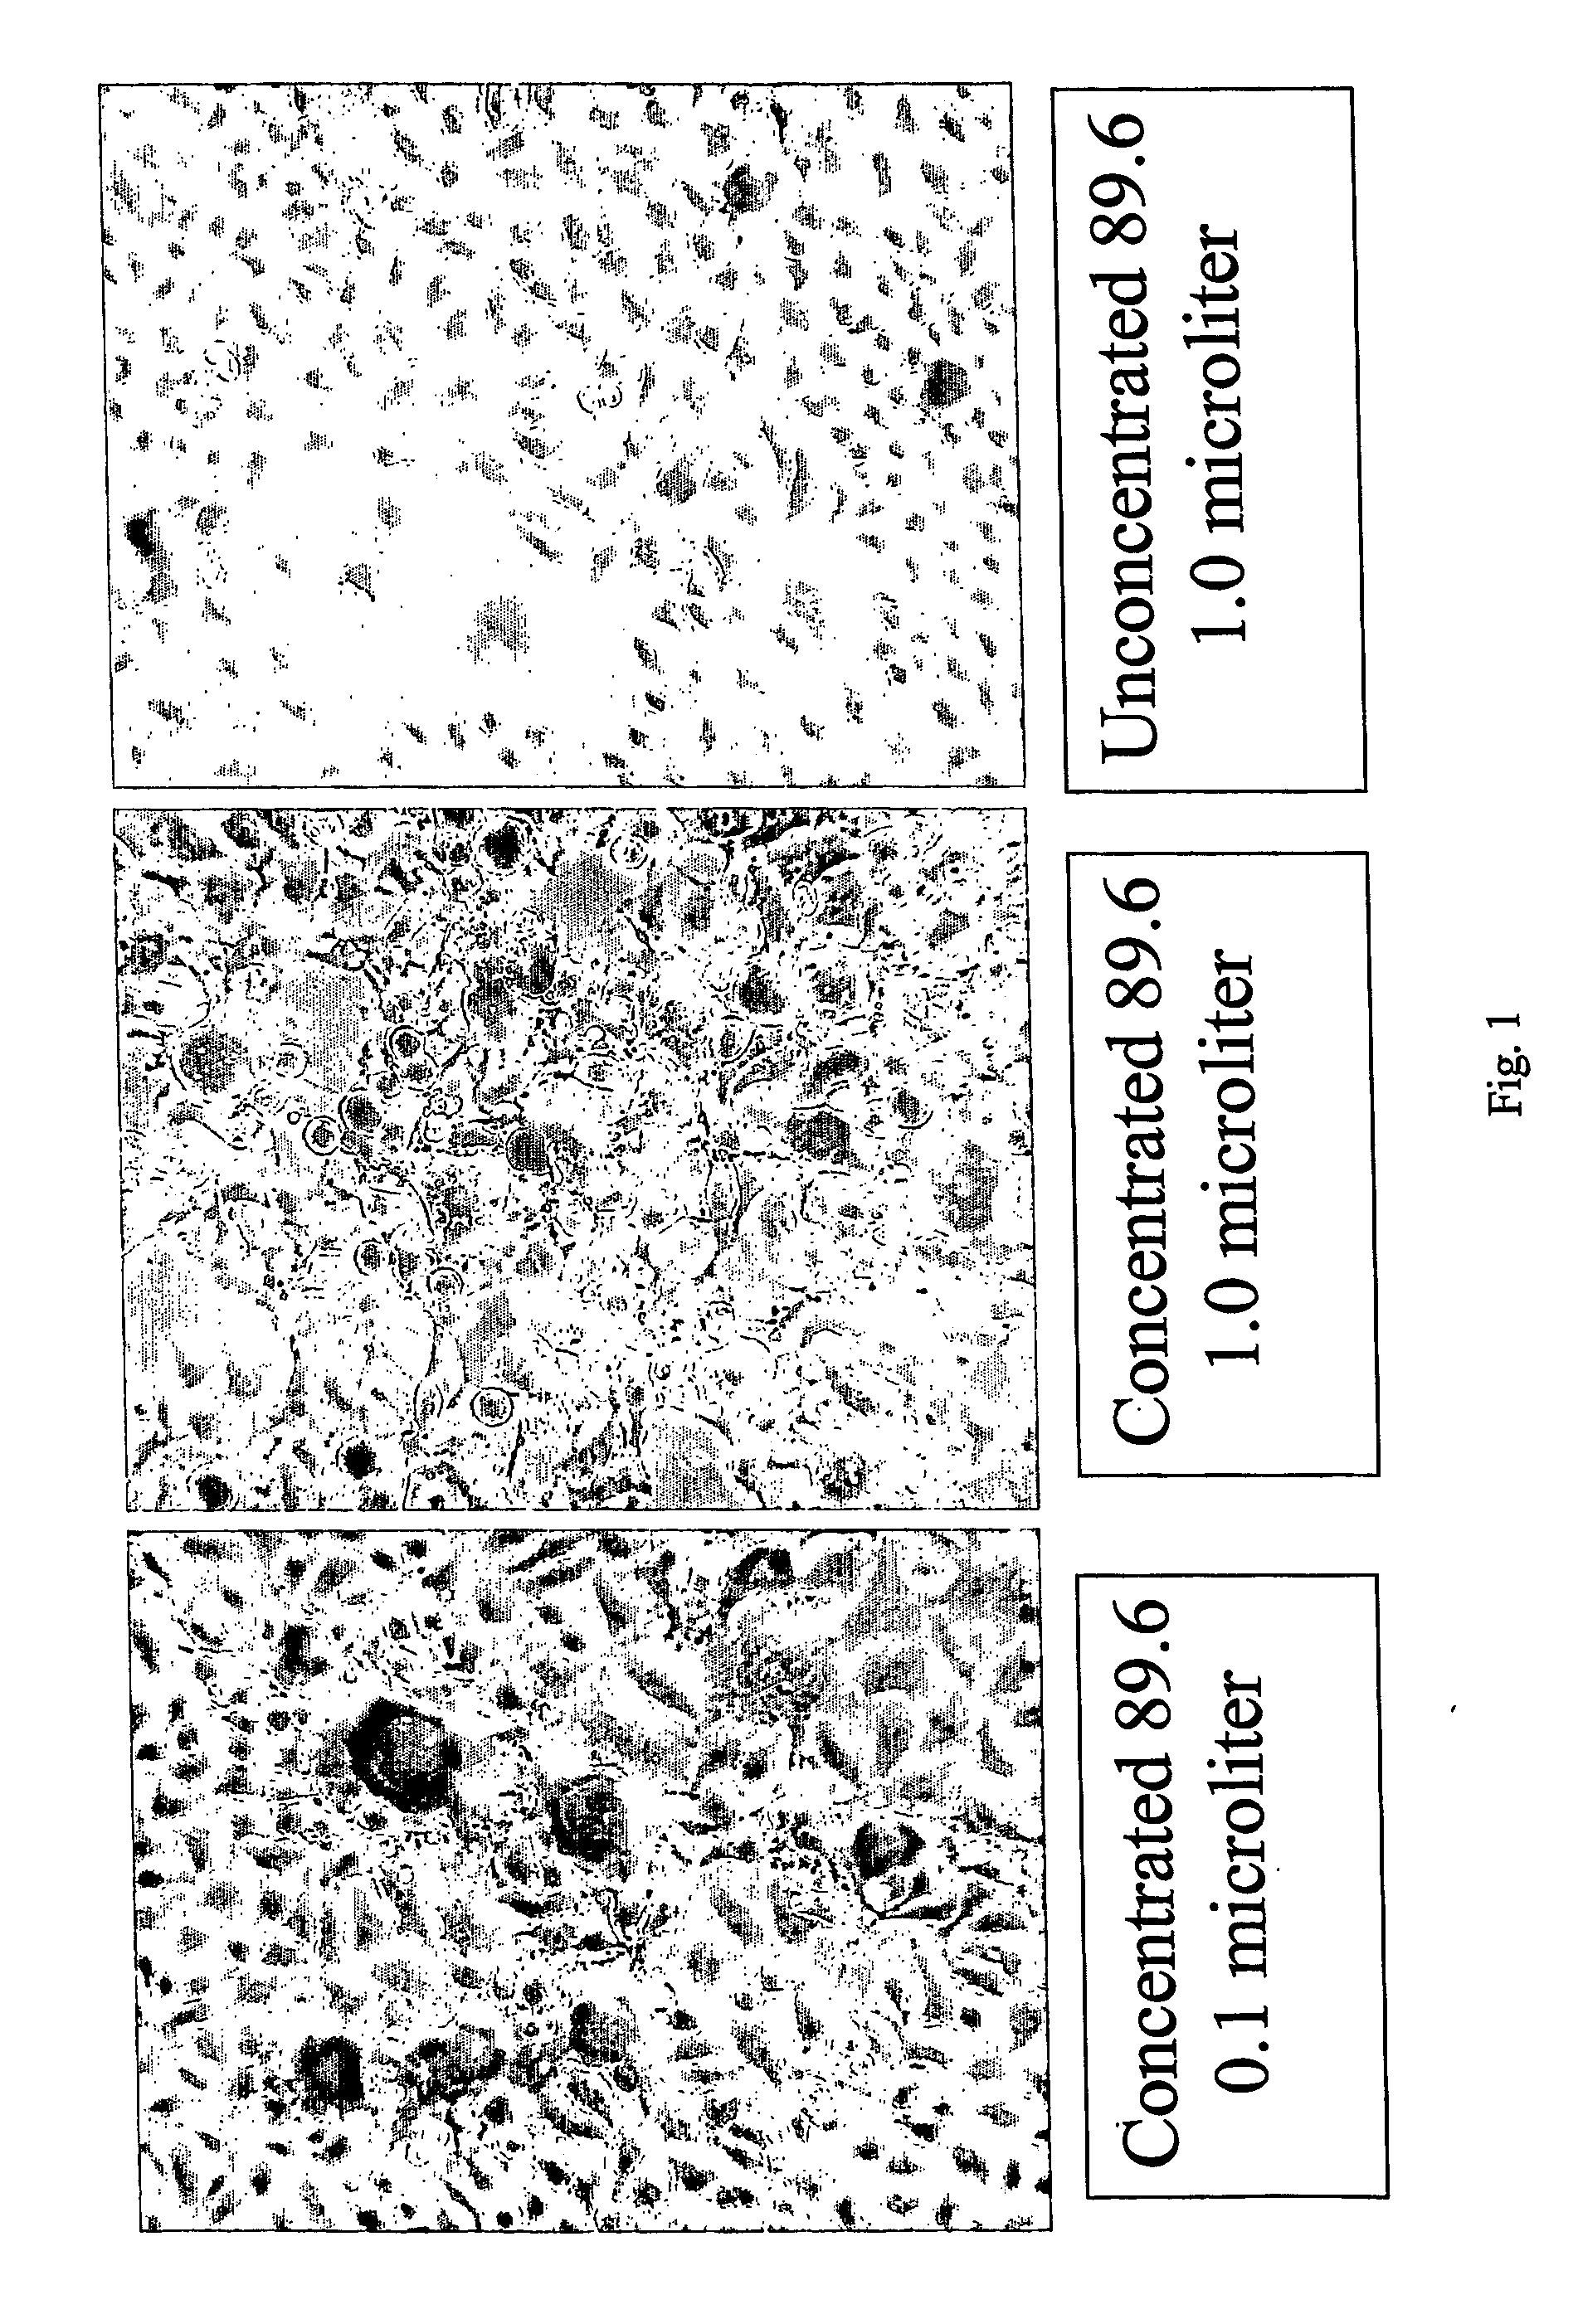 Methods of treatment and diagnosis using modulators of virus-induced cellular gene sequences